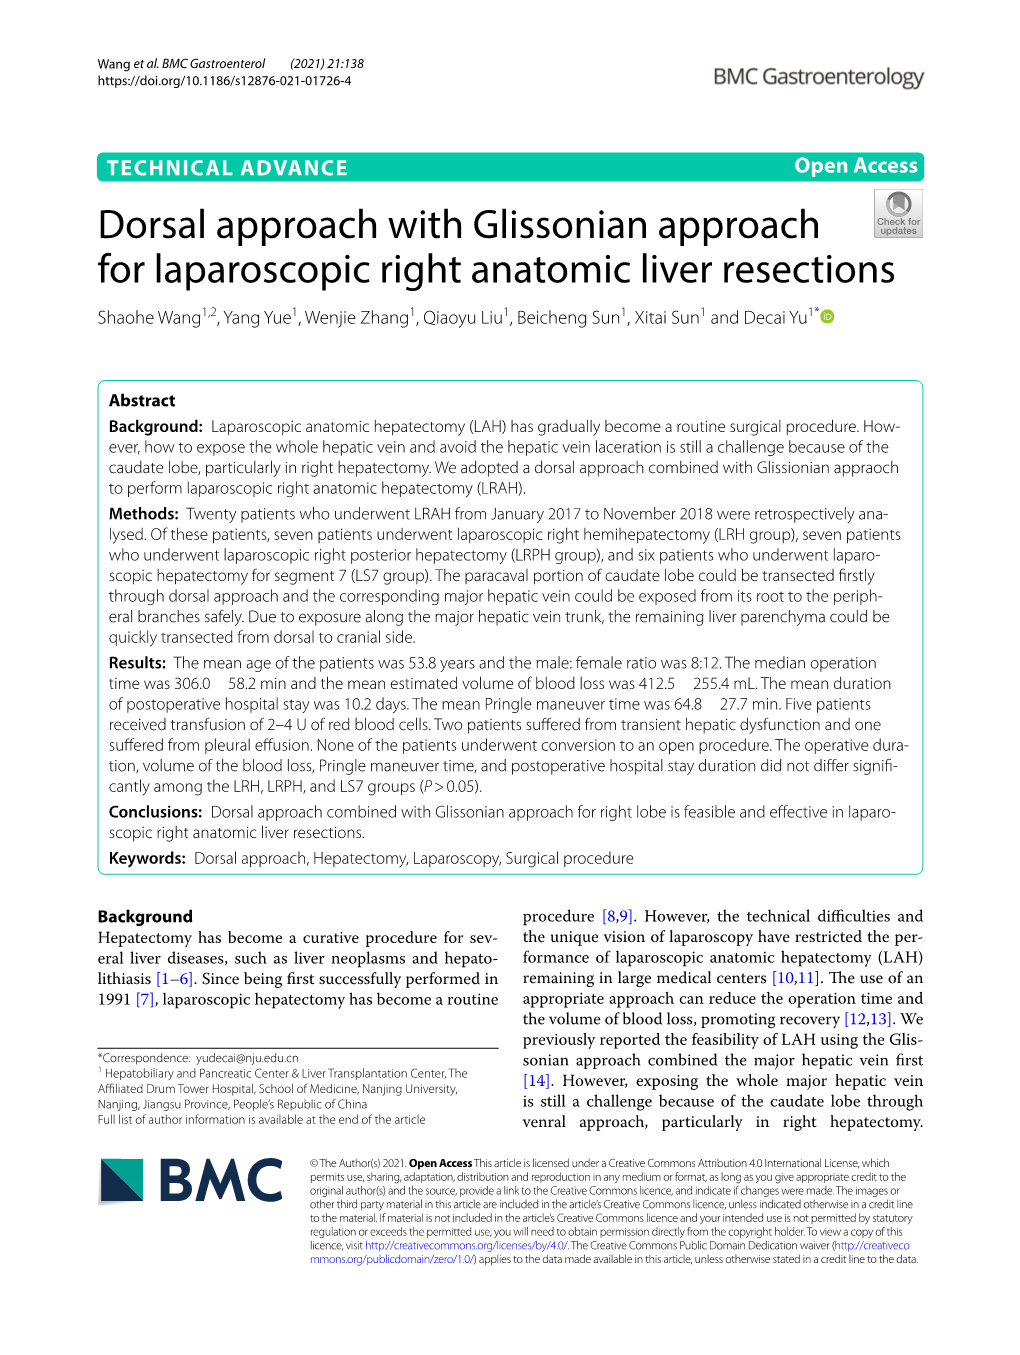 Dorsal Approach with Glissonian Approach for Laparoscopic Right